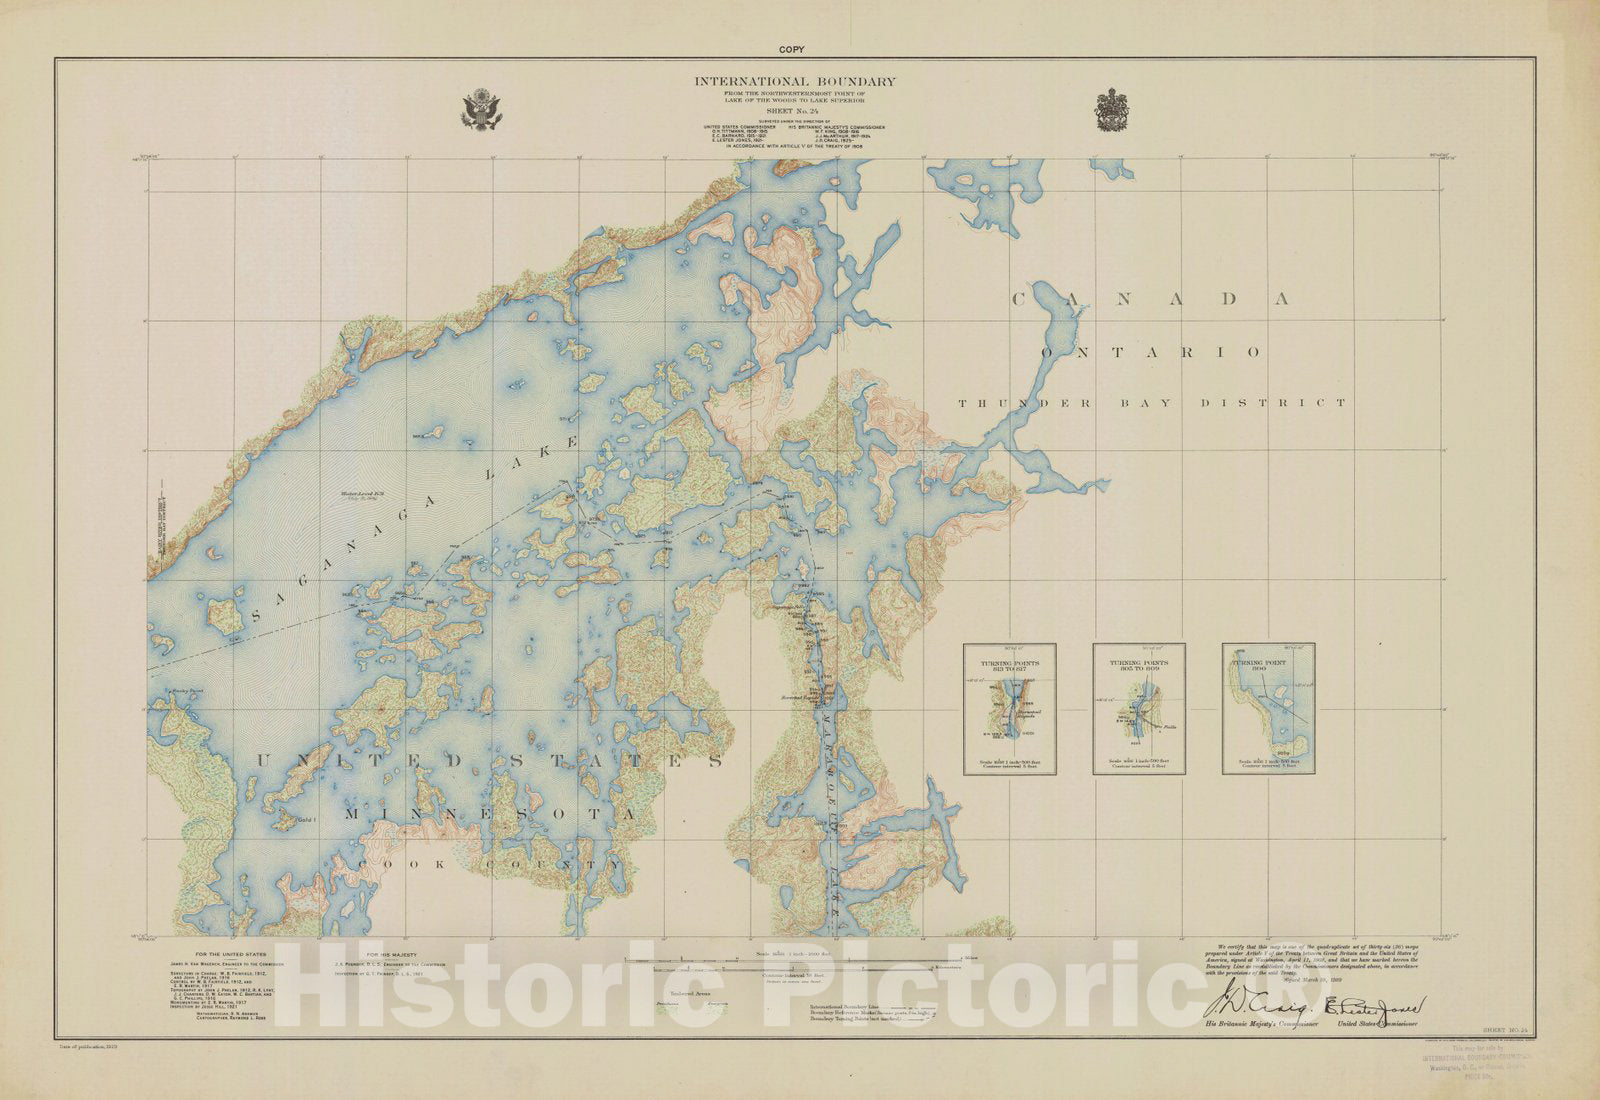 Historic Nautical Map - International Boundary, From The Northwestern Point Of Lake Of The Woods To Lake Superior, Sheet No.24, MN, 1929 NOAA Topographic - Vintage Decor Poster Wall Art Reproduction - 0